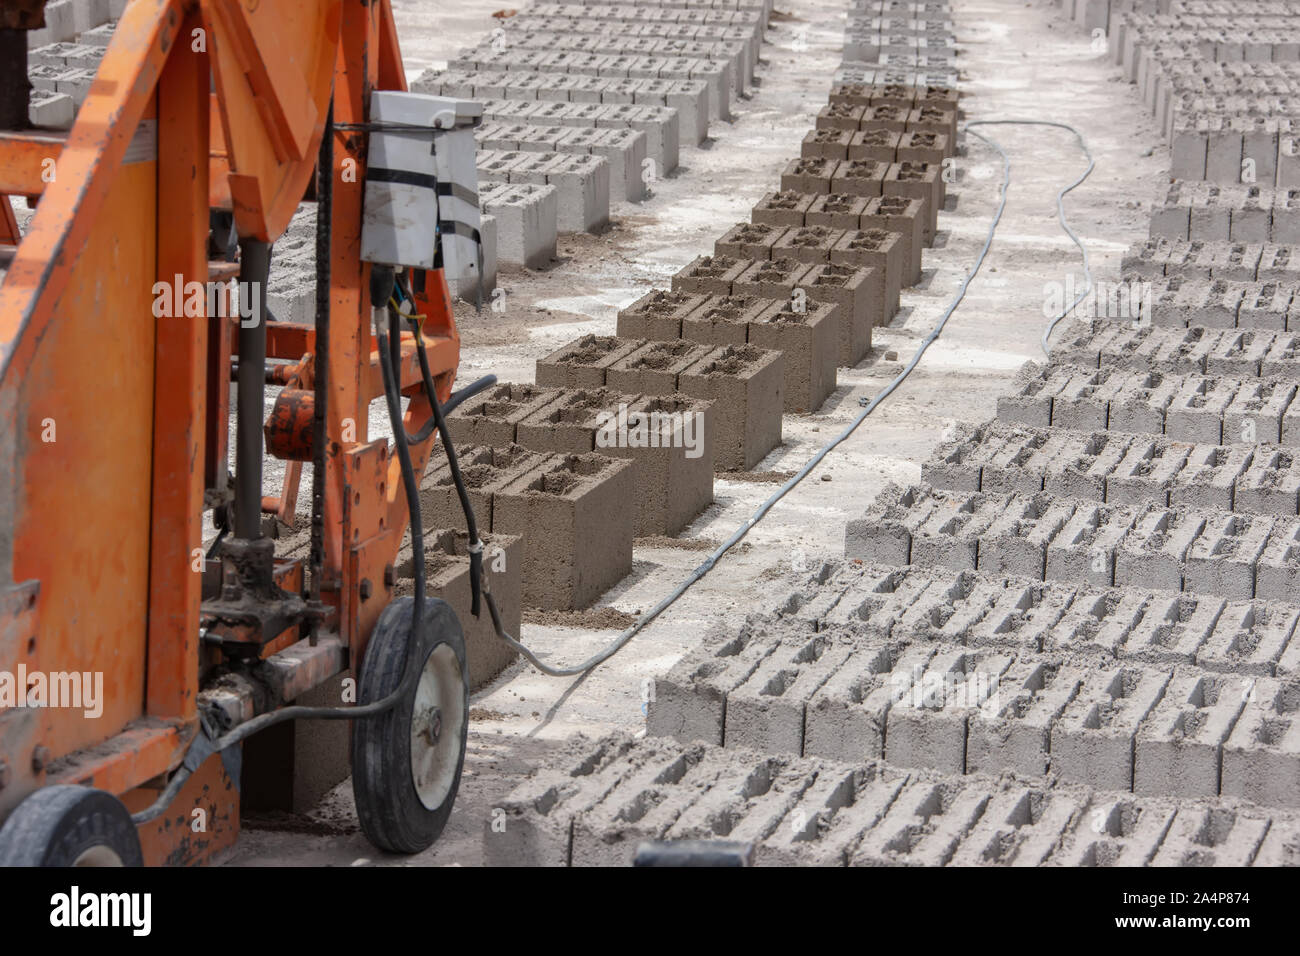 bricks and a brick machine on a construction site in Botswana, Africa Stock Photo